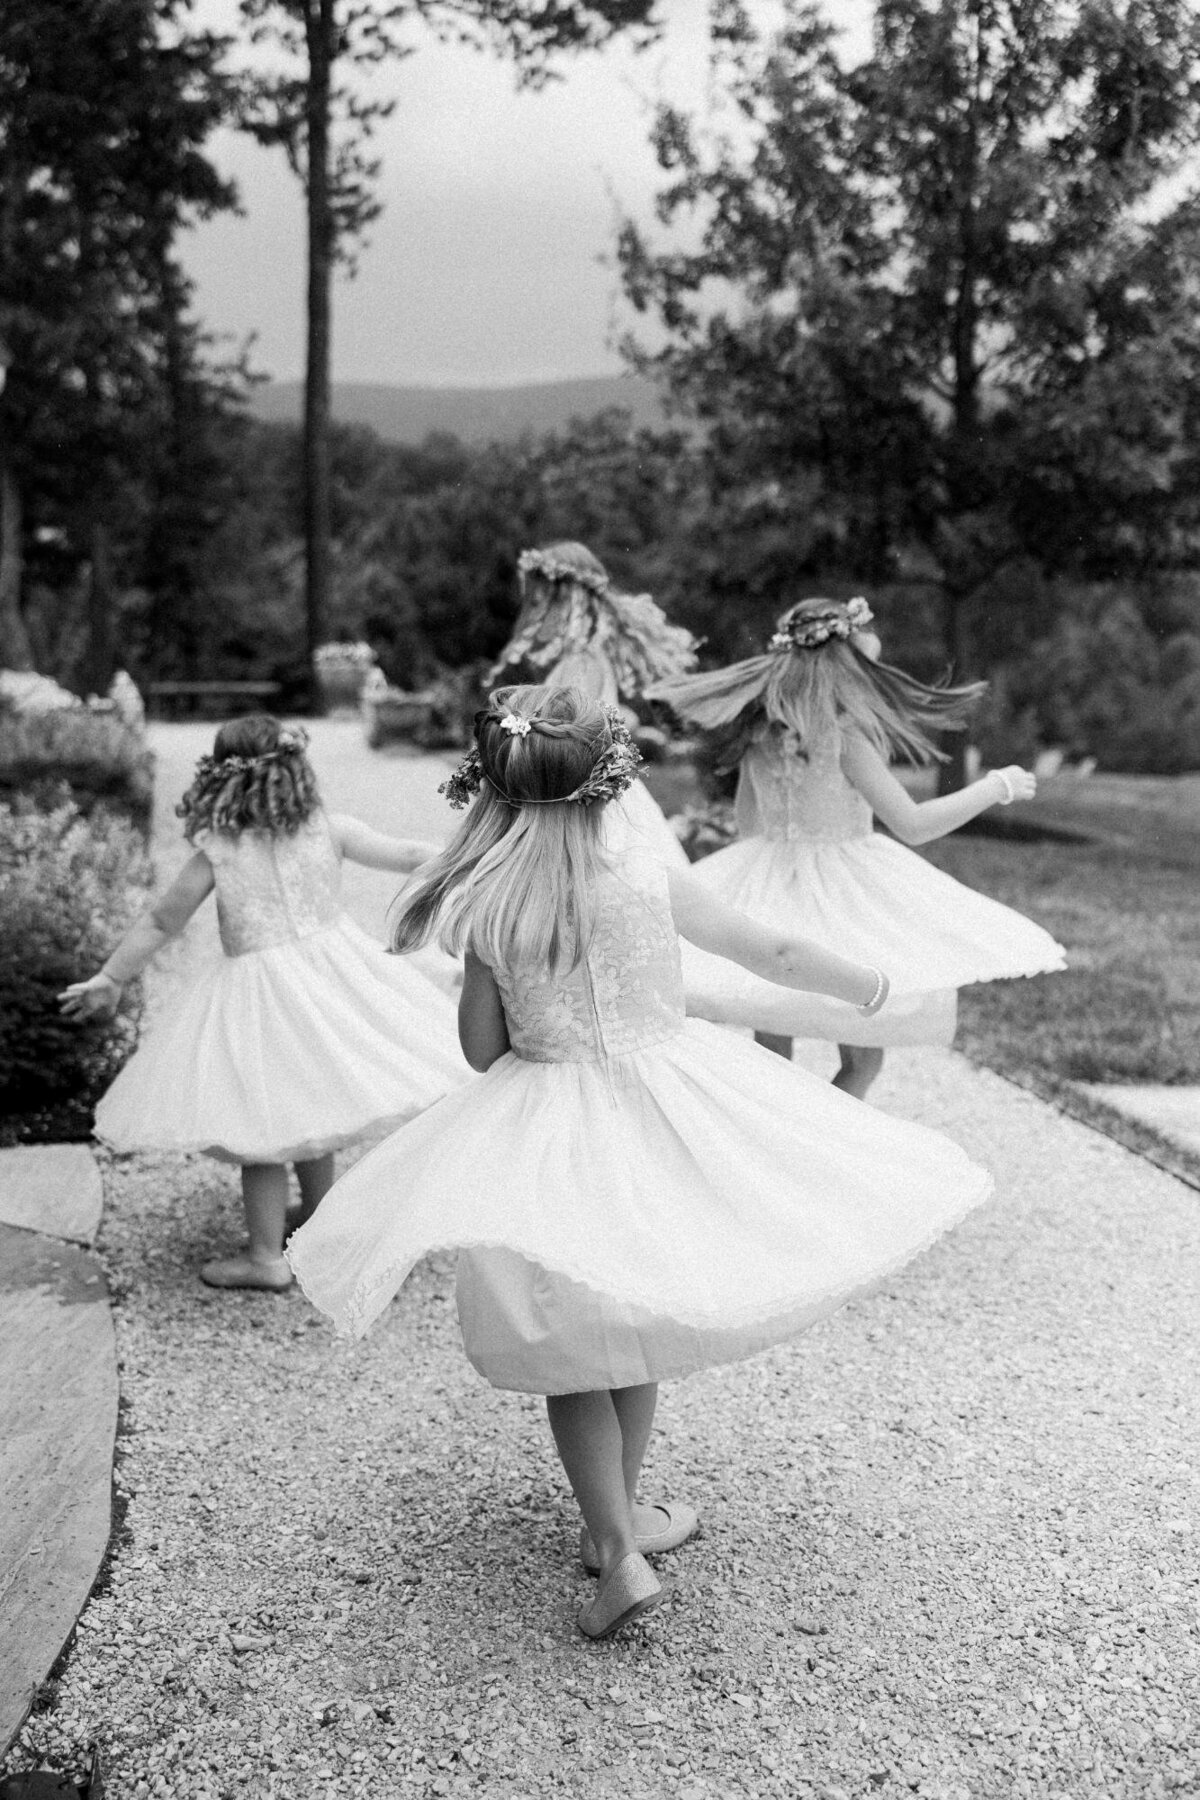 A black and white photo of young girls in tutus and floral headpieces walking along a garden path.